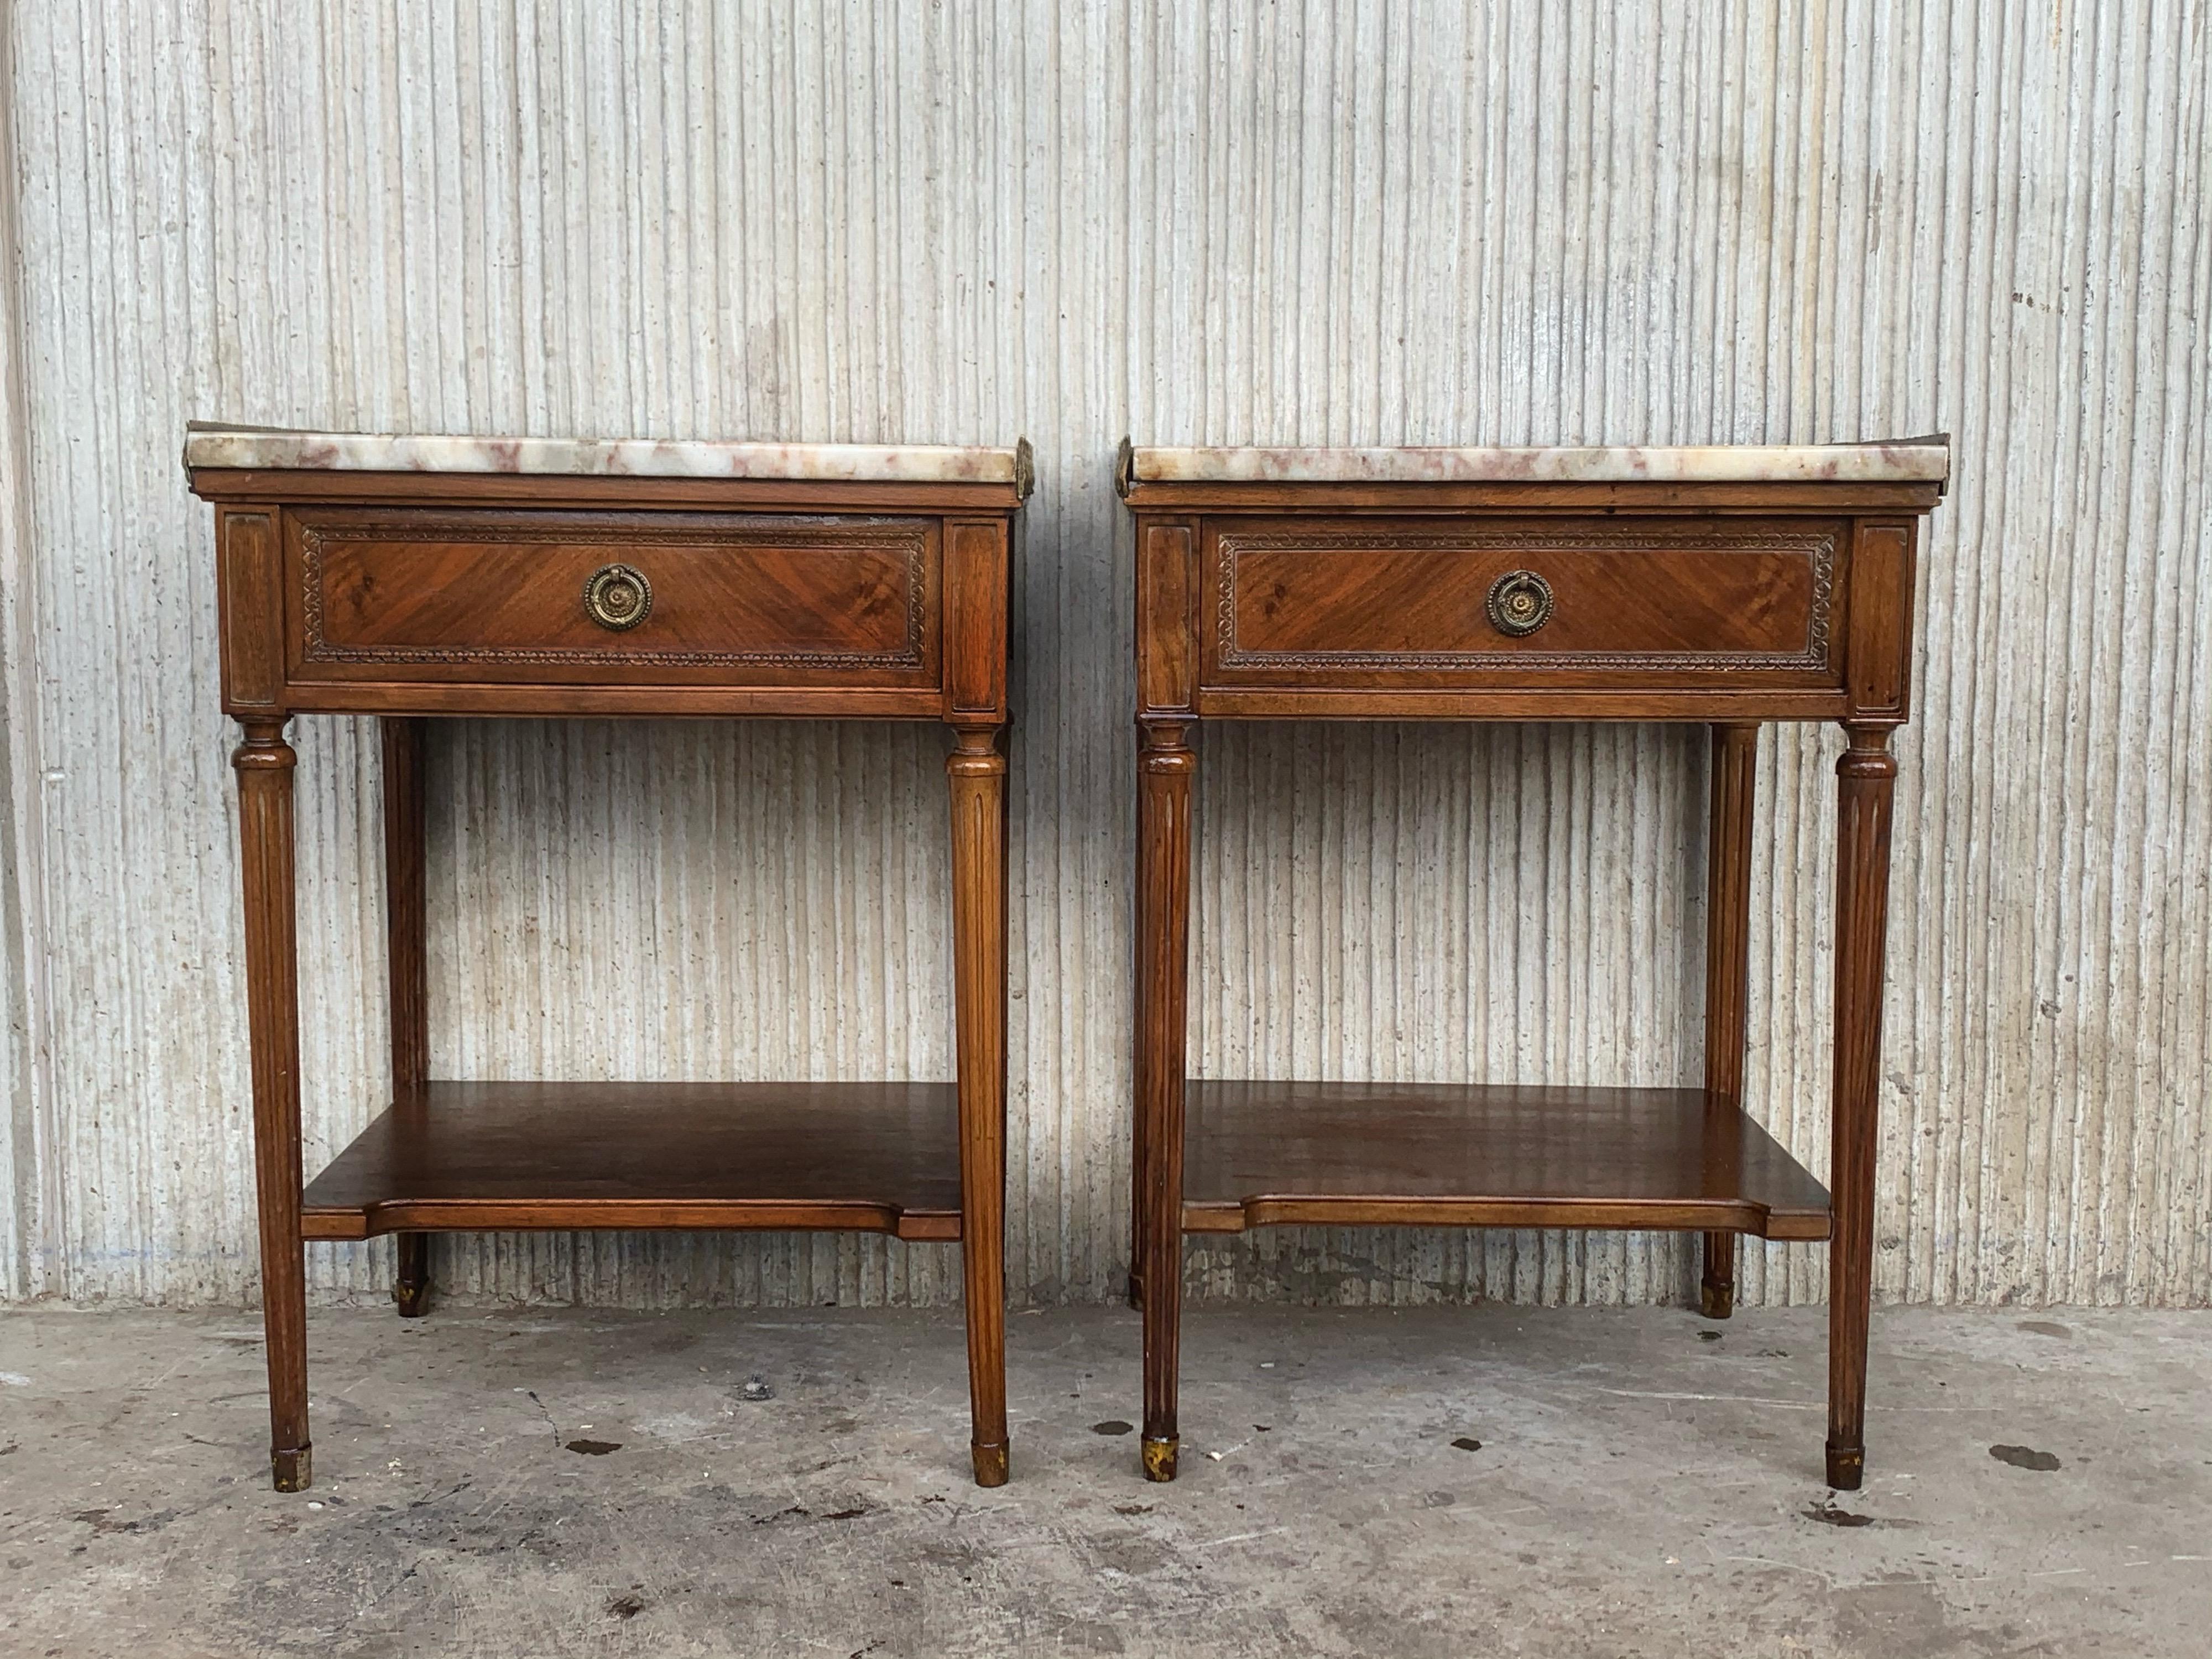 Neoclassical Revival Early 20th Century Pair of French Nightstands with One-Drawer and Marble Top